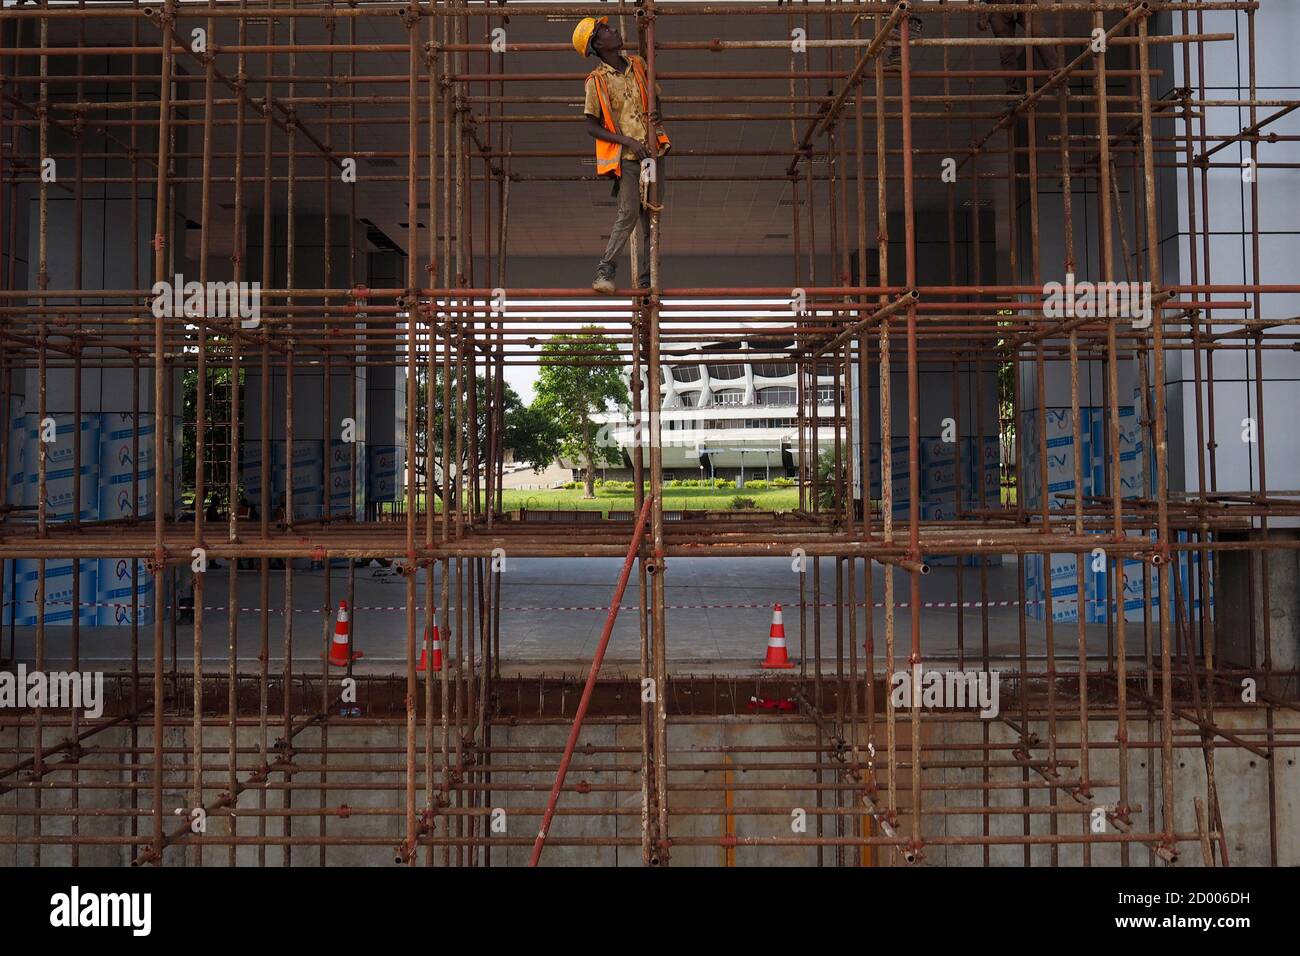 A man works at the National Arts Theatre stop of the light rail system under construction in Lagos, Nigeria, May 30, 2014. Started in 2009 to ease traffic, Lagos state government is building a rail system with the China Civil Engineering Construction Corporation. The first test runs should start in 2015, according to an official at the National Arts Theatre work site. REUTERS/Joe Penney (NIGERIA - Tags: BUSINESS CONSTRUCTION EMPLOYMENT TRANSPORT POLITICS SOCIETY) Stock Photo